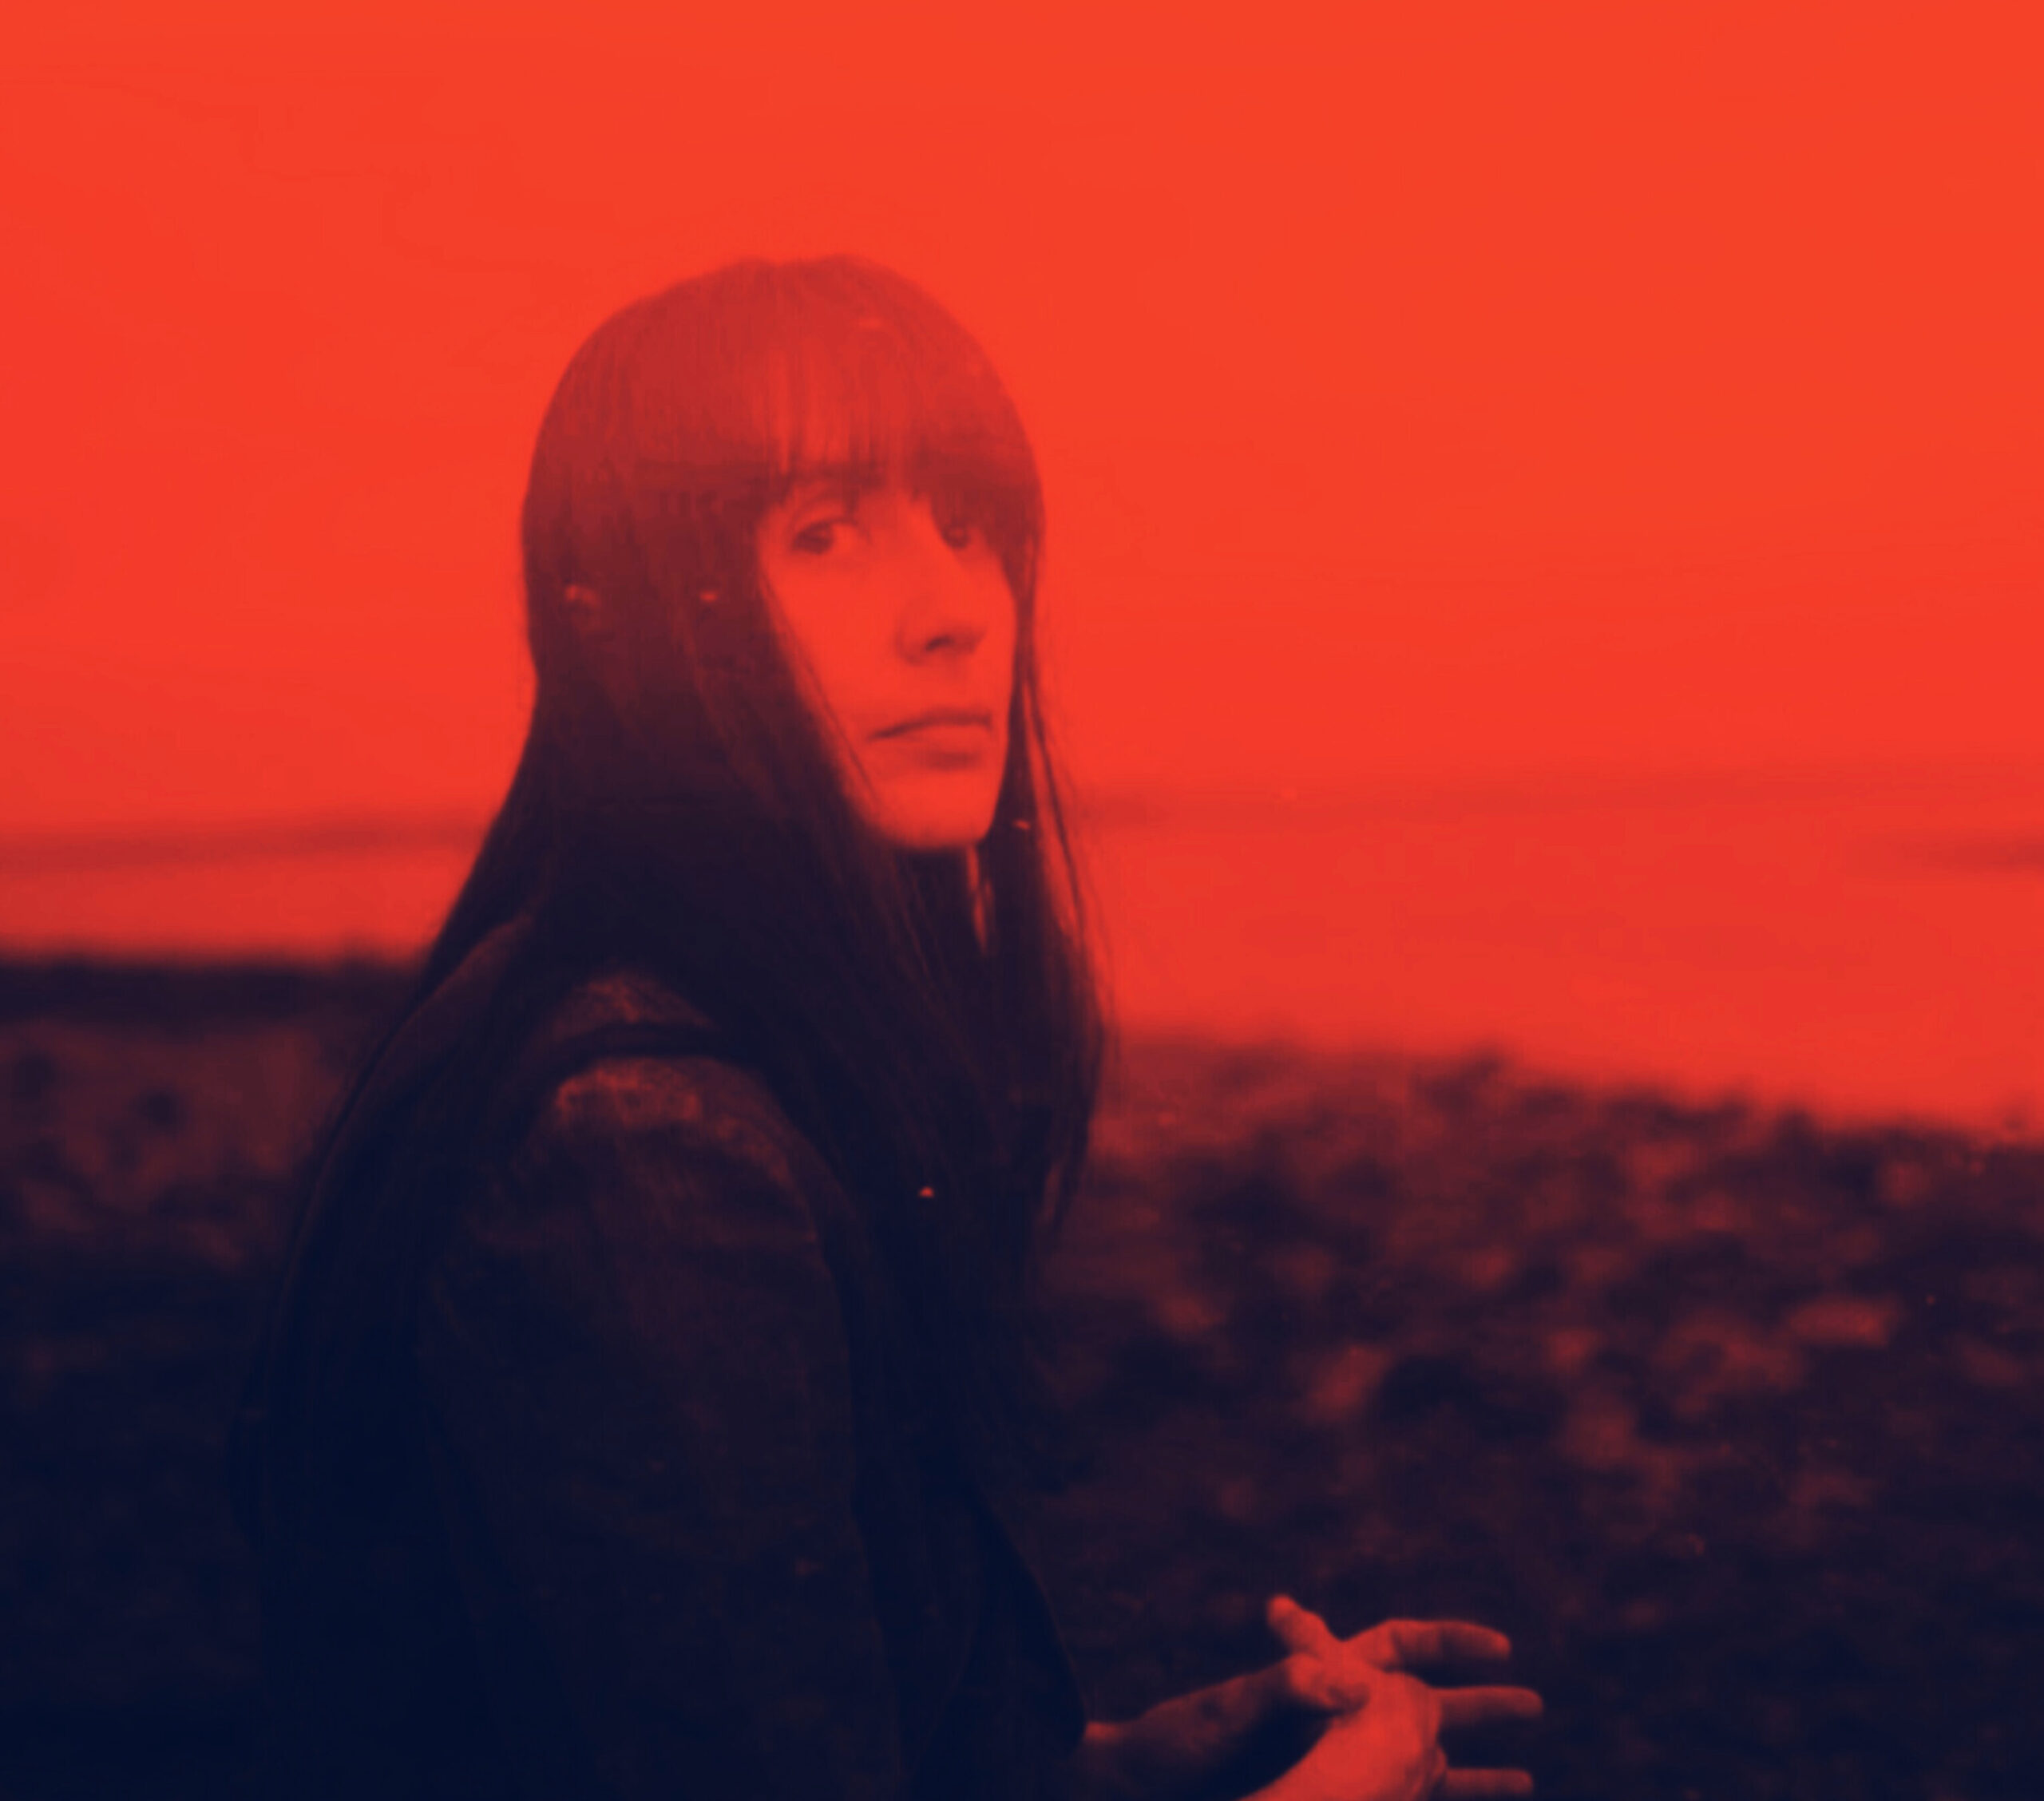 A photo of the poet Colleen Coco Collins. A red-tinted photograph, the poet stands by a shoreline, looking over her shoulder.